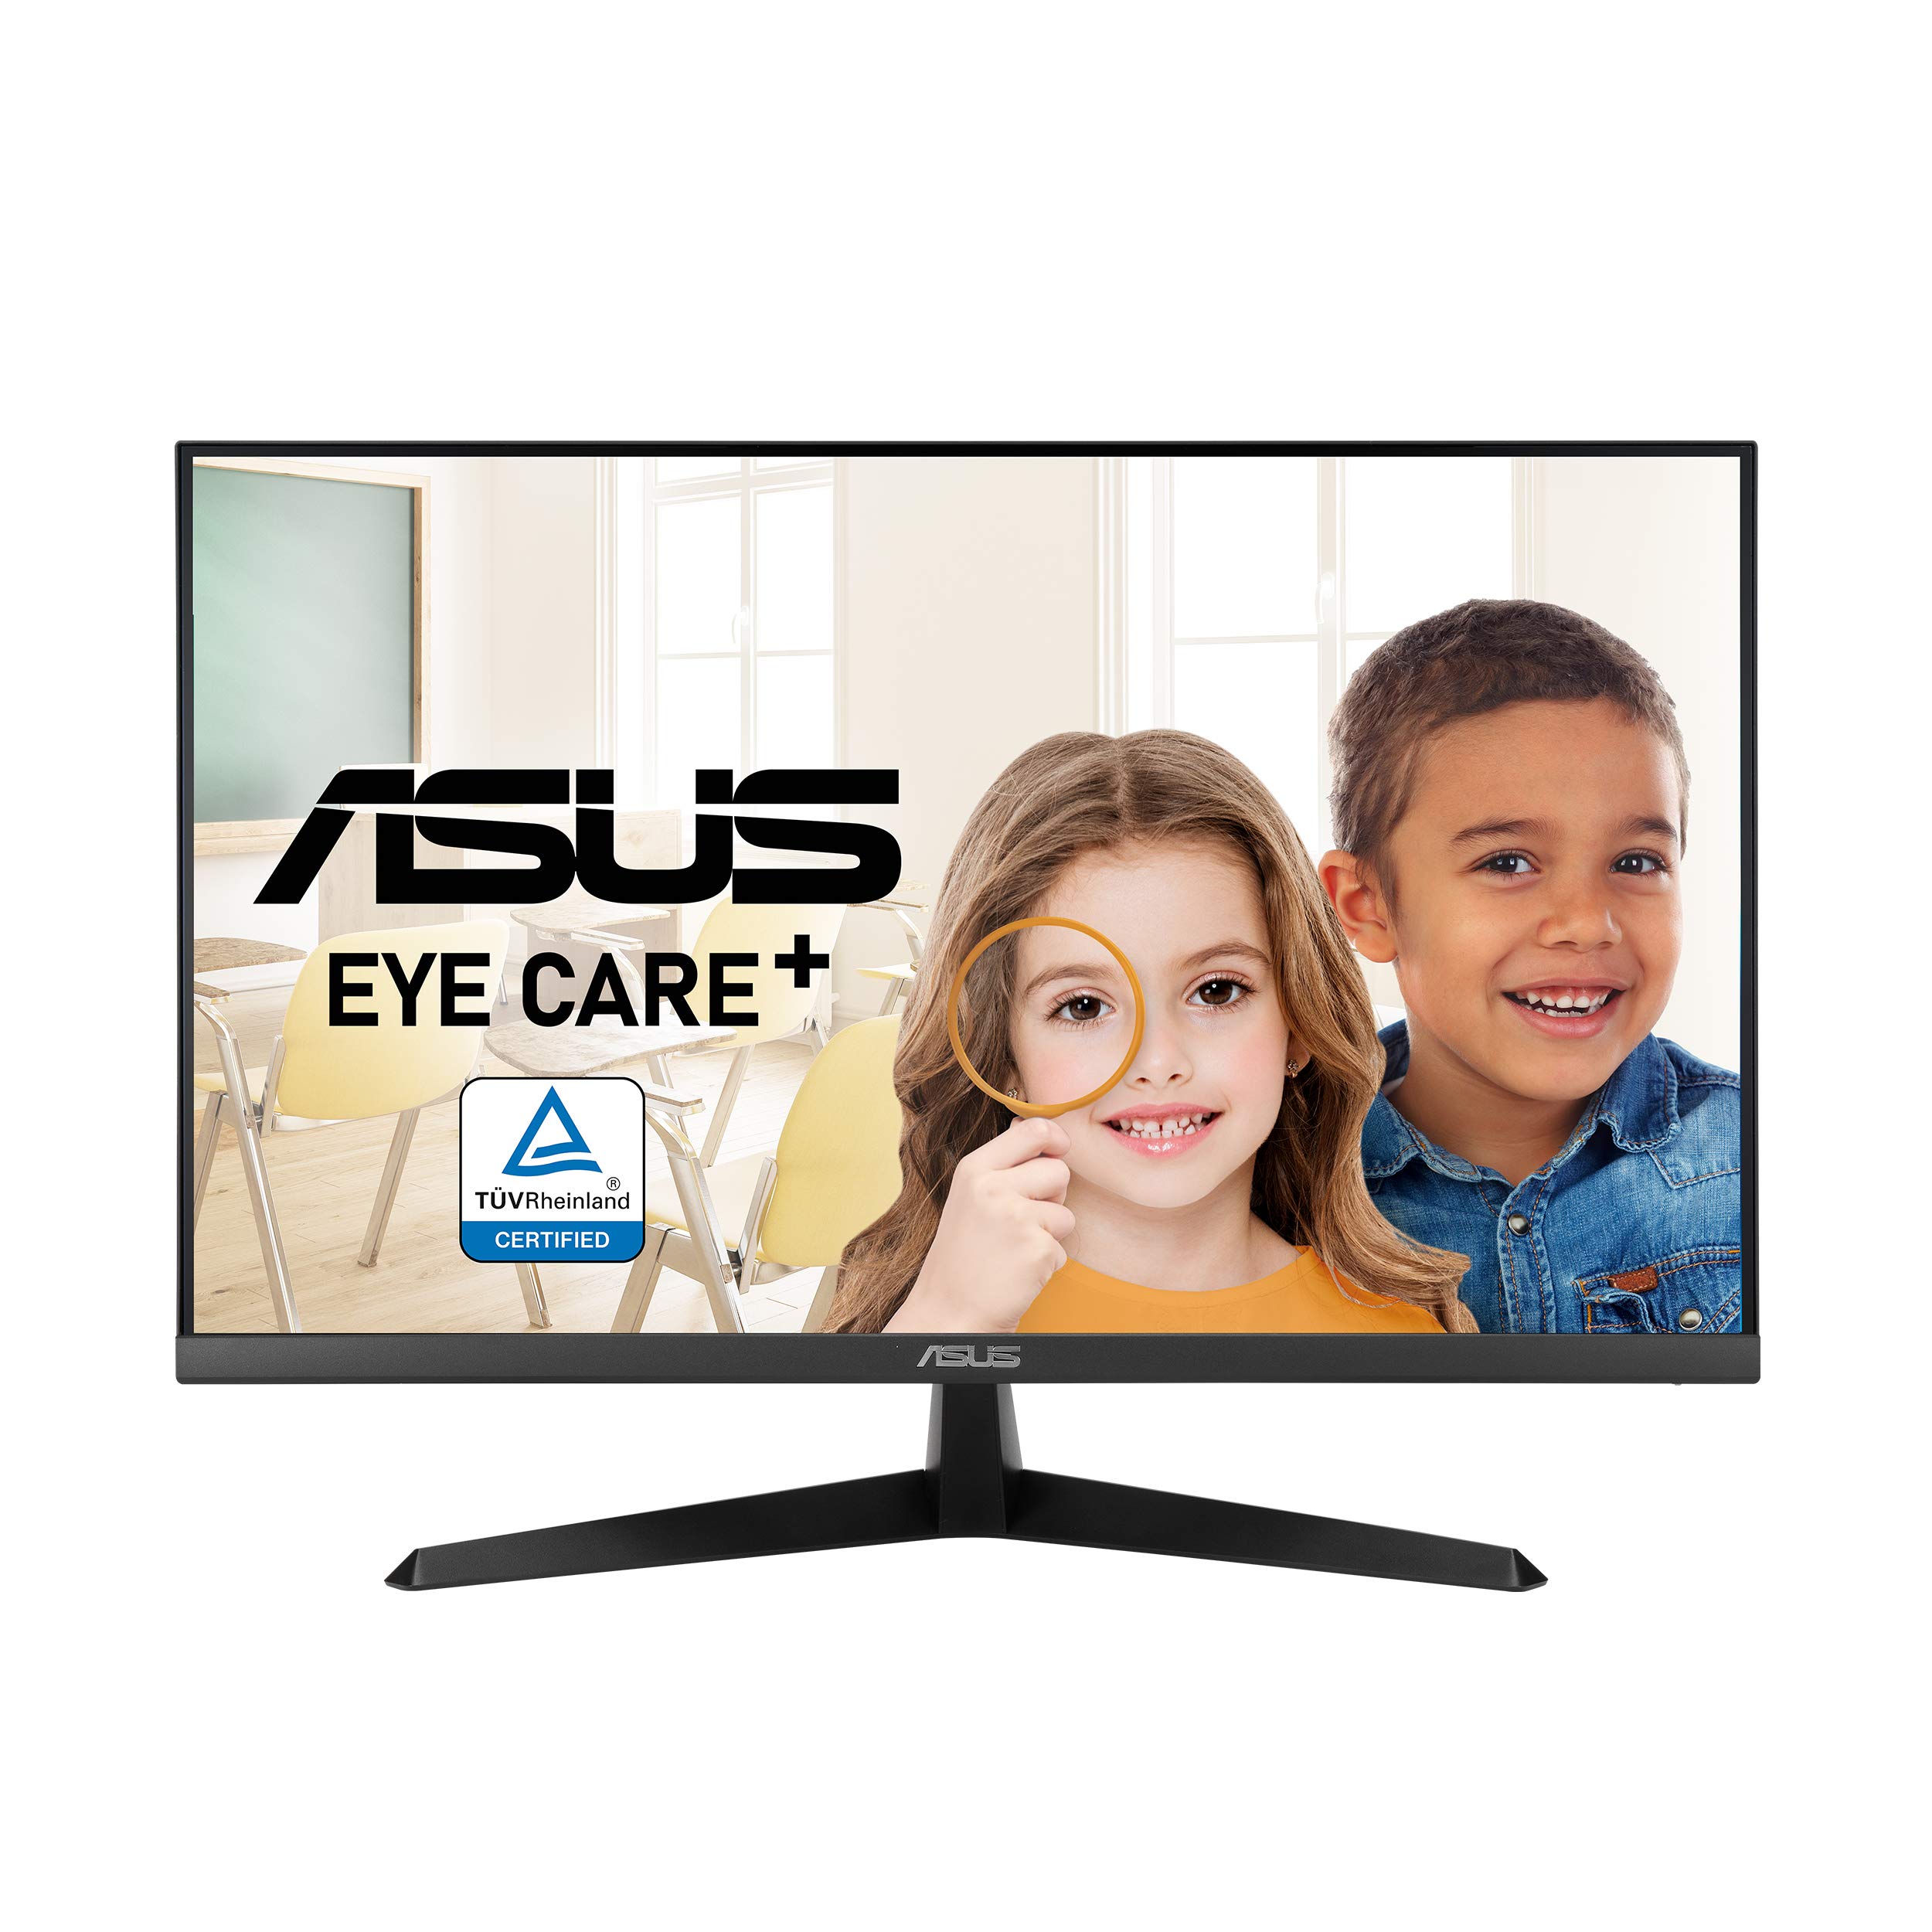 Asus VY279HE 27” Eye Care Monitor, 1080P Full HD, 75Hz,...